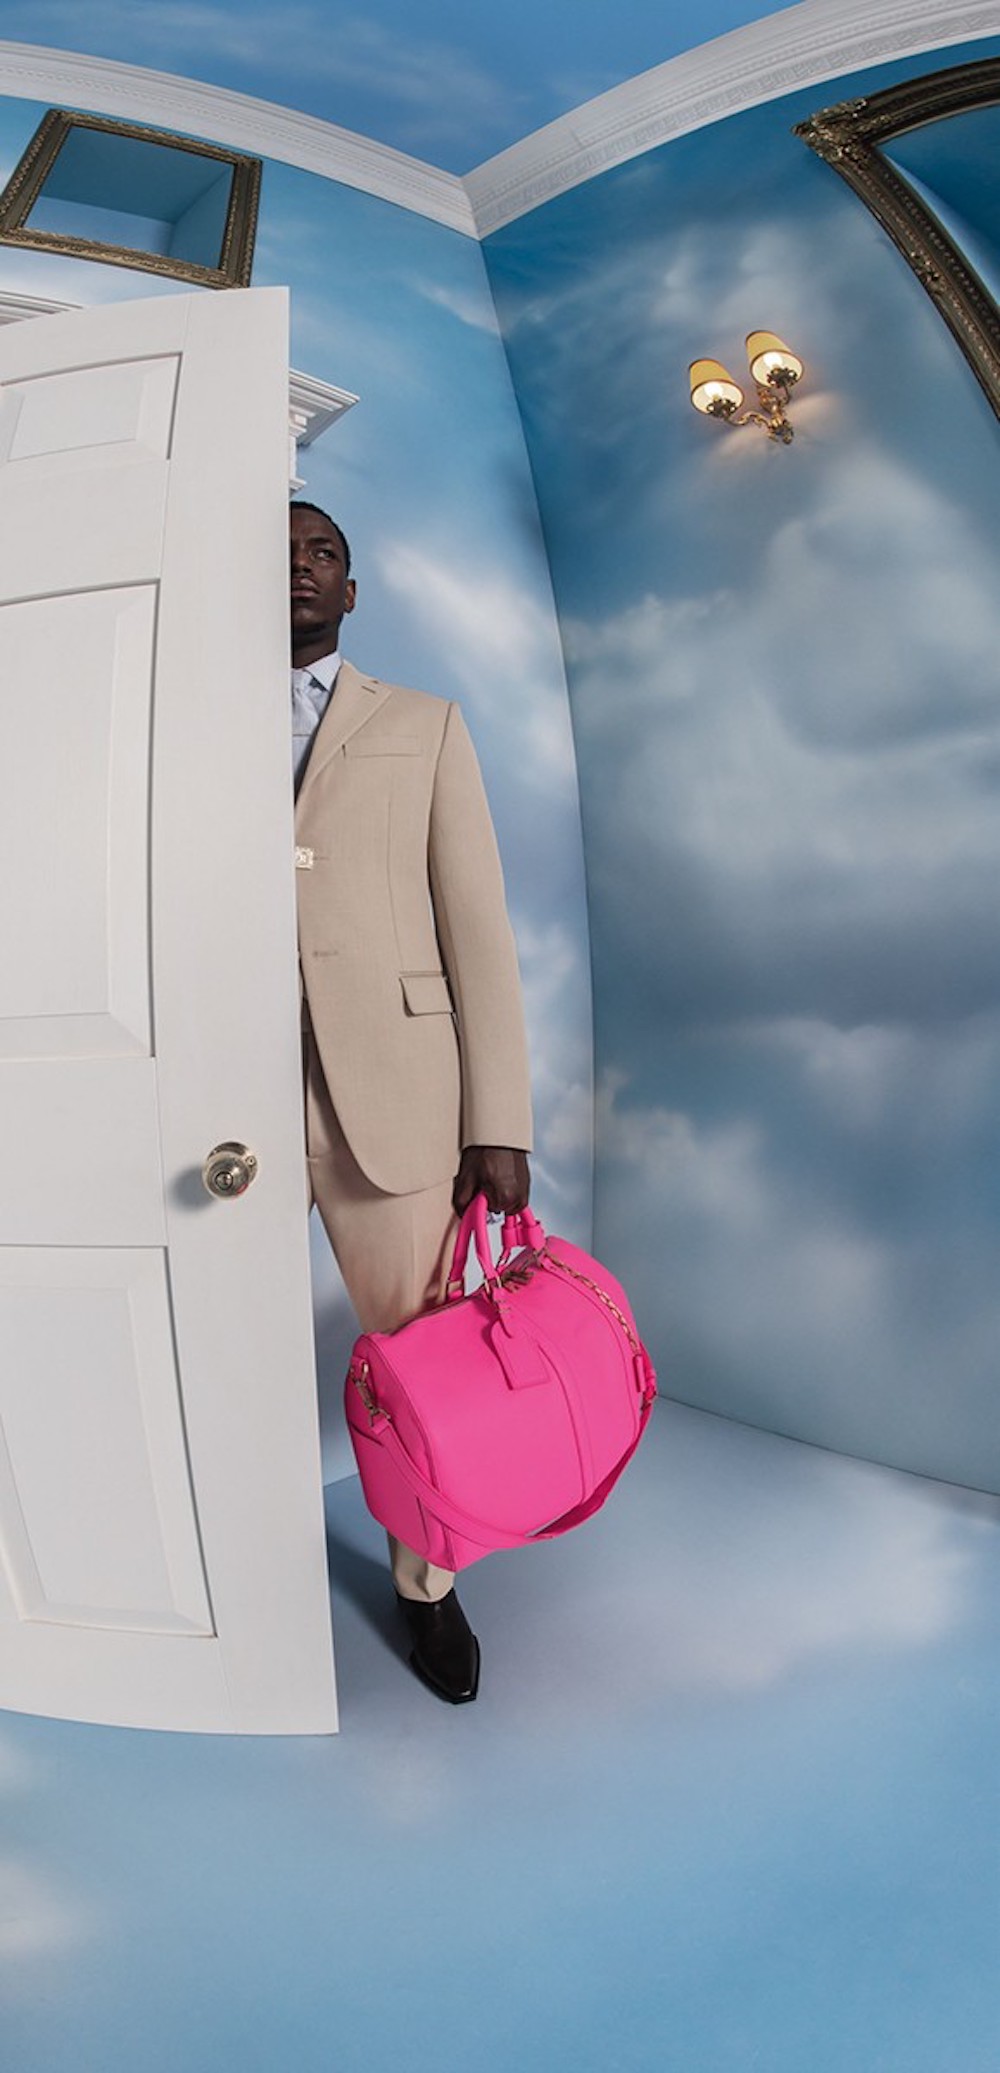 Louis Vuitton Fall 2020.21 'Heaven on Earth' Campaign Lensed by